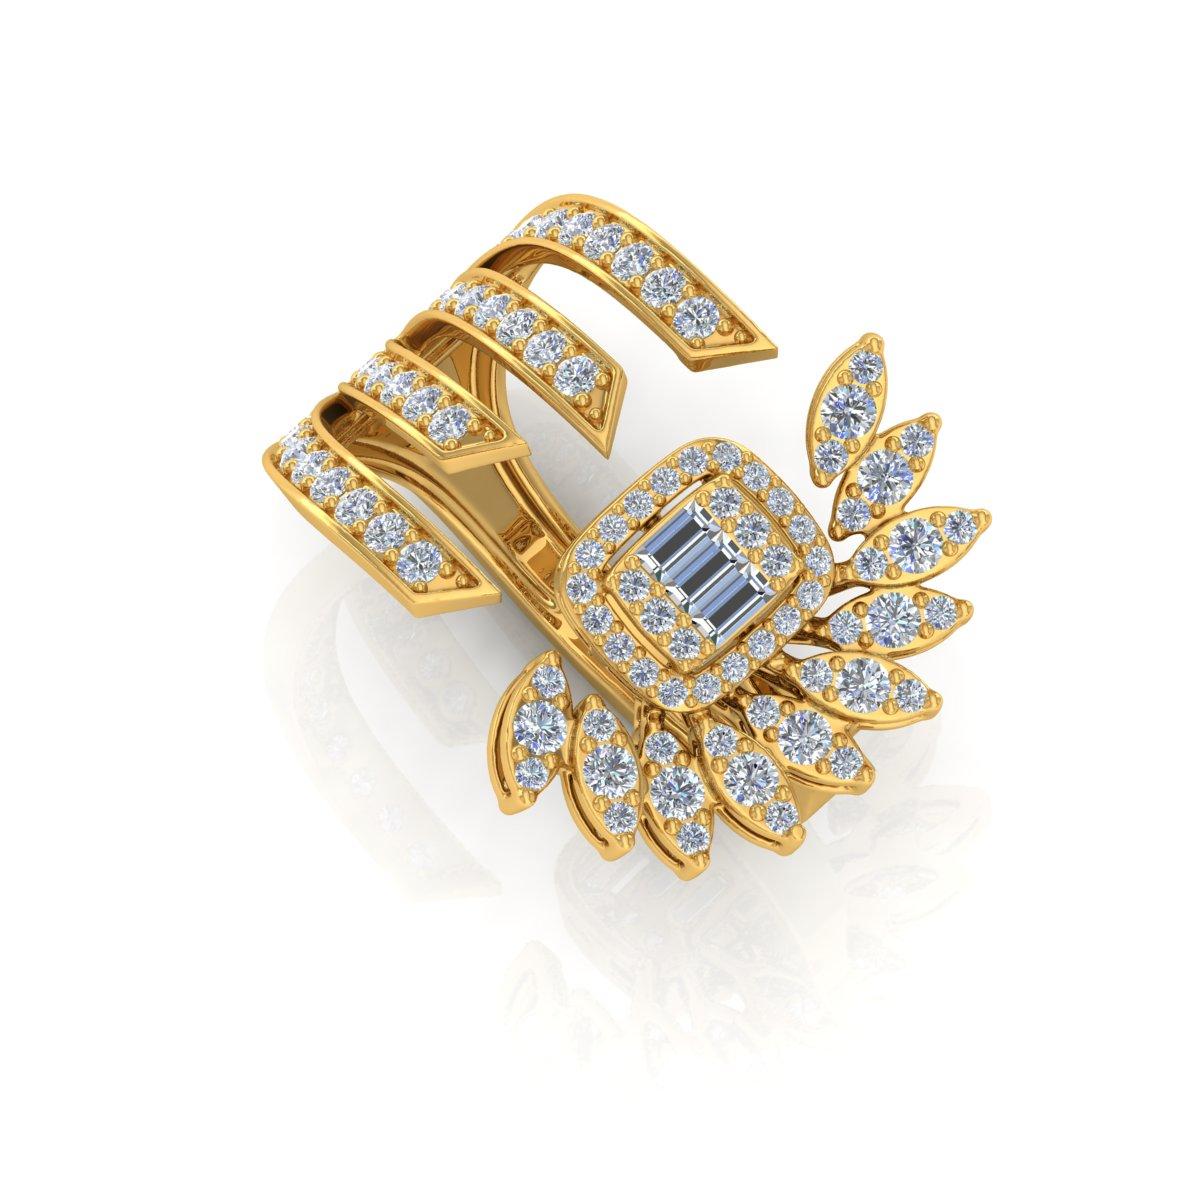 For Sale:  1.30 Carat SI Clarity HI Color Diamond Cuff Ring Solid 18k Yellow Gold Jewelry 2